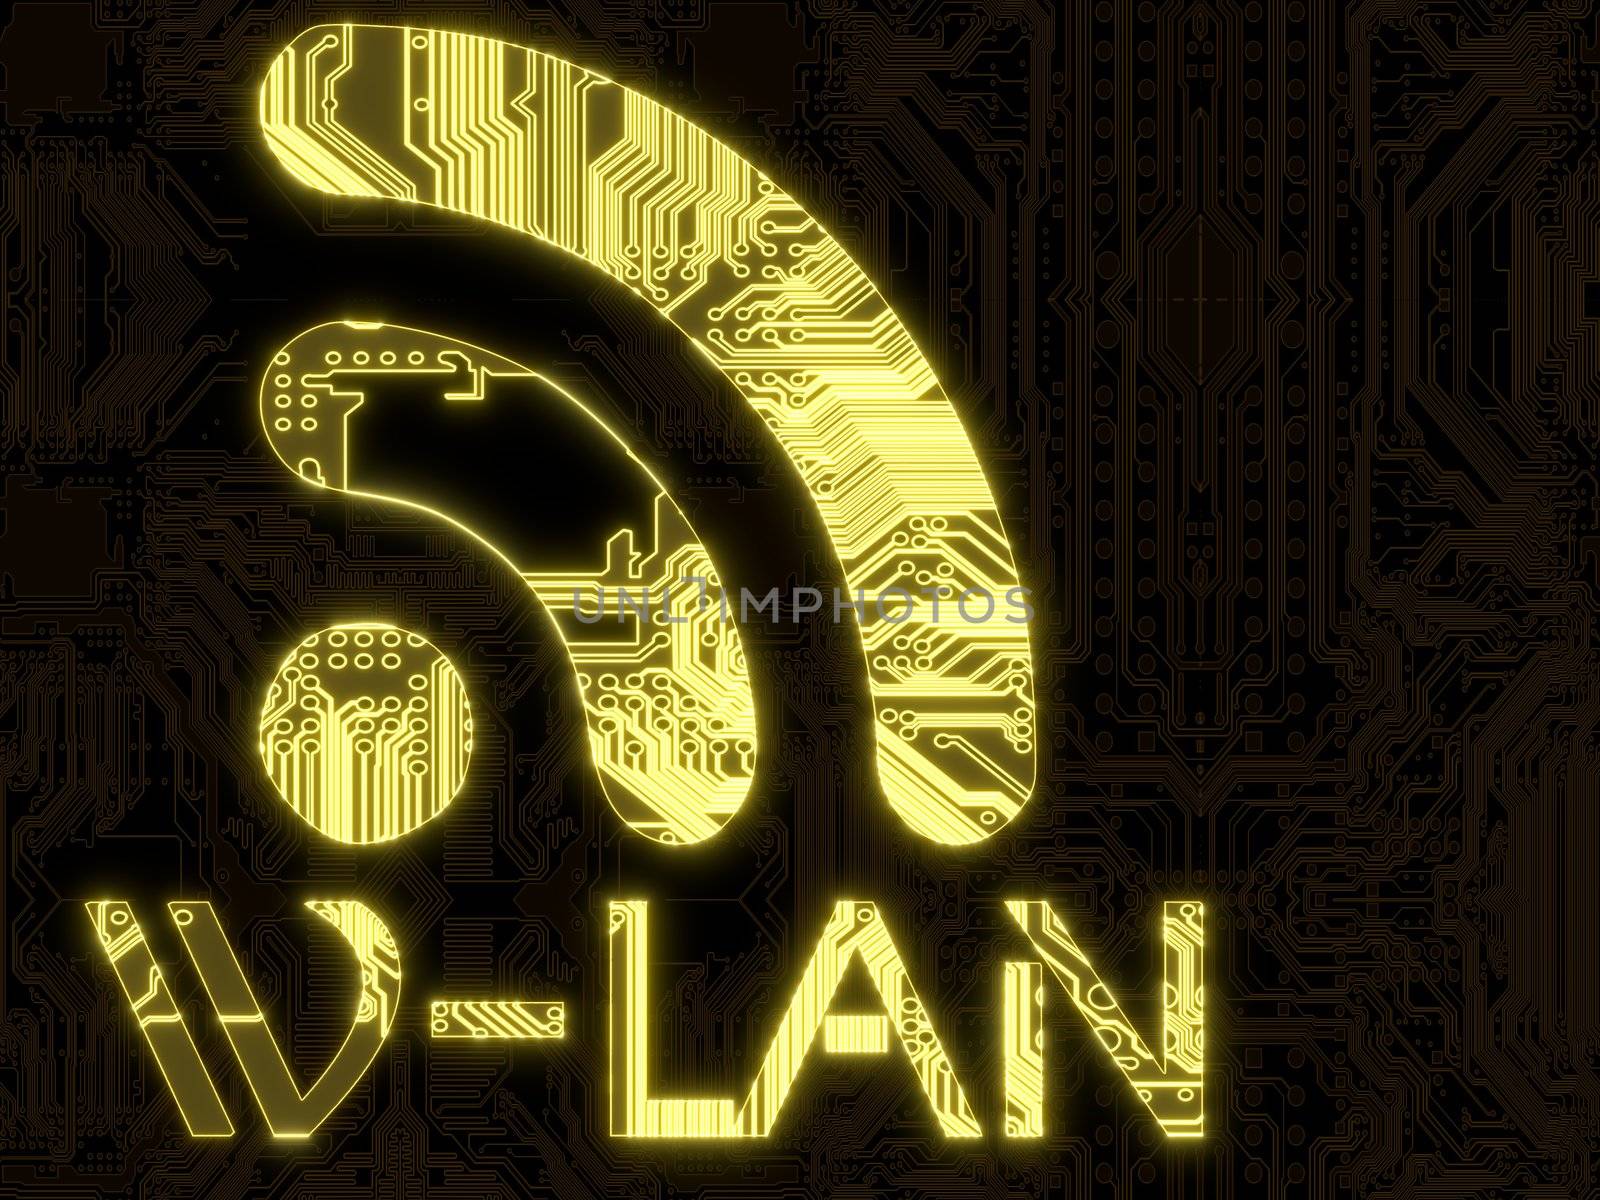 Glowing computer w-lan symbol on a computer chip by onirb